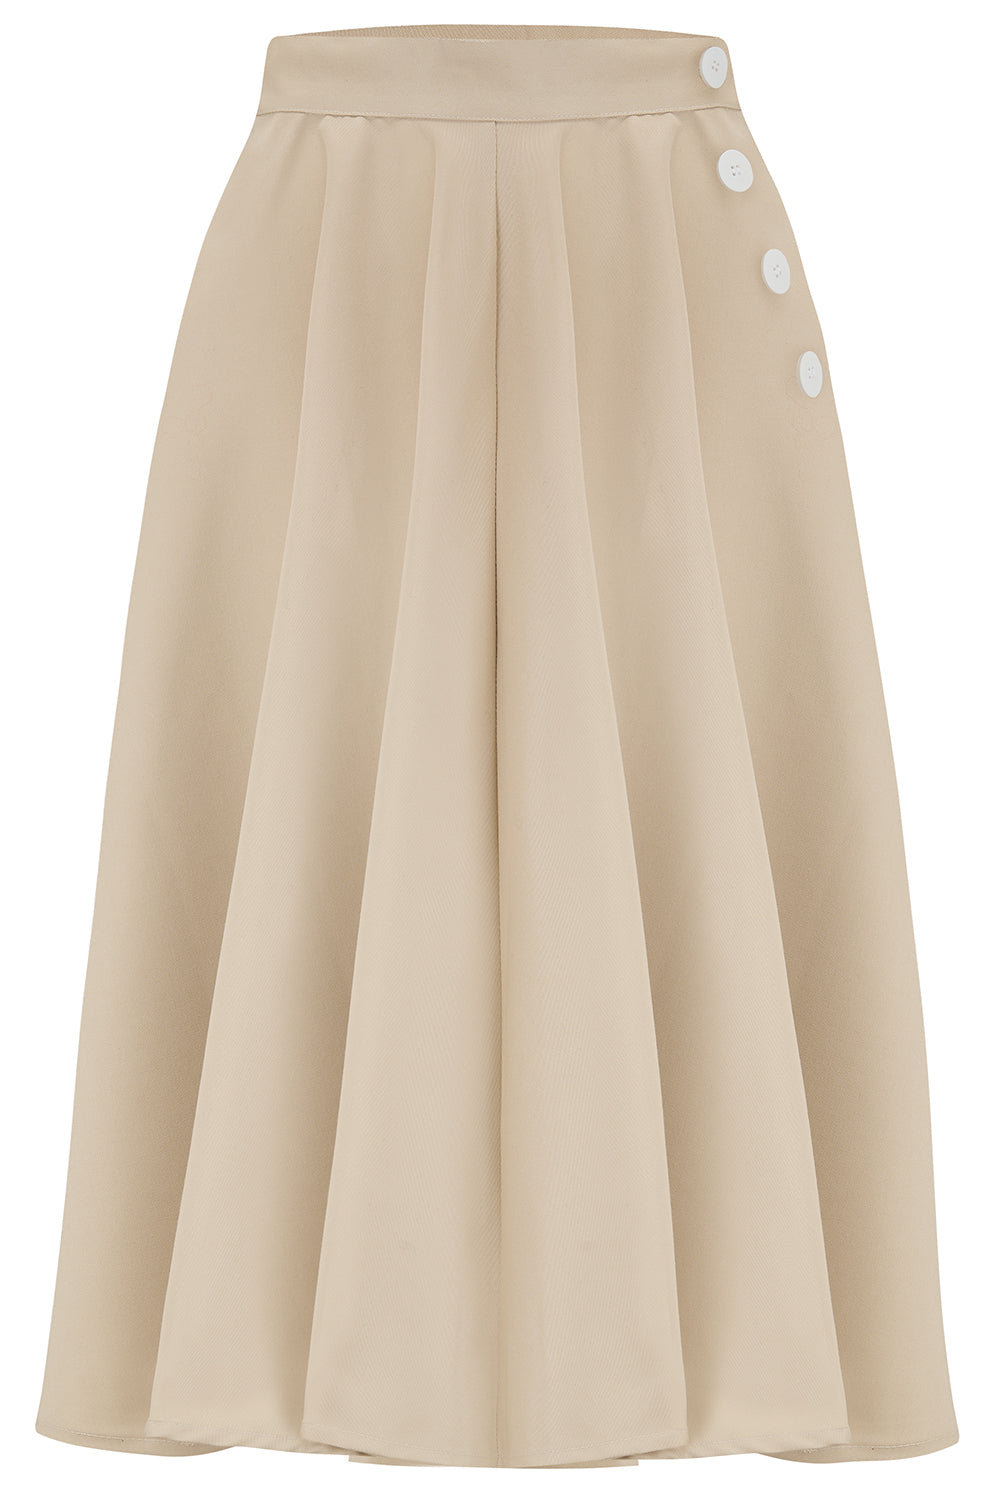 "Sylvia"  Tailored Skirt in Stone , Classic & Authentic 1940s Vintage Inspired Style